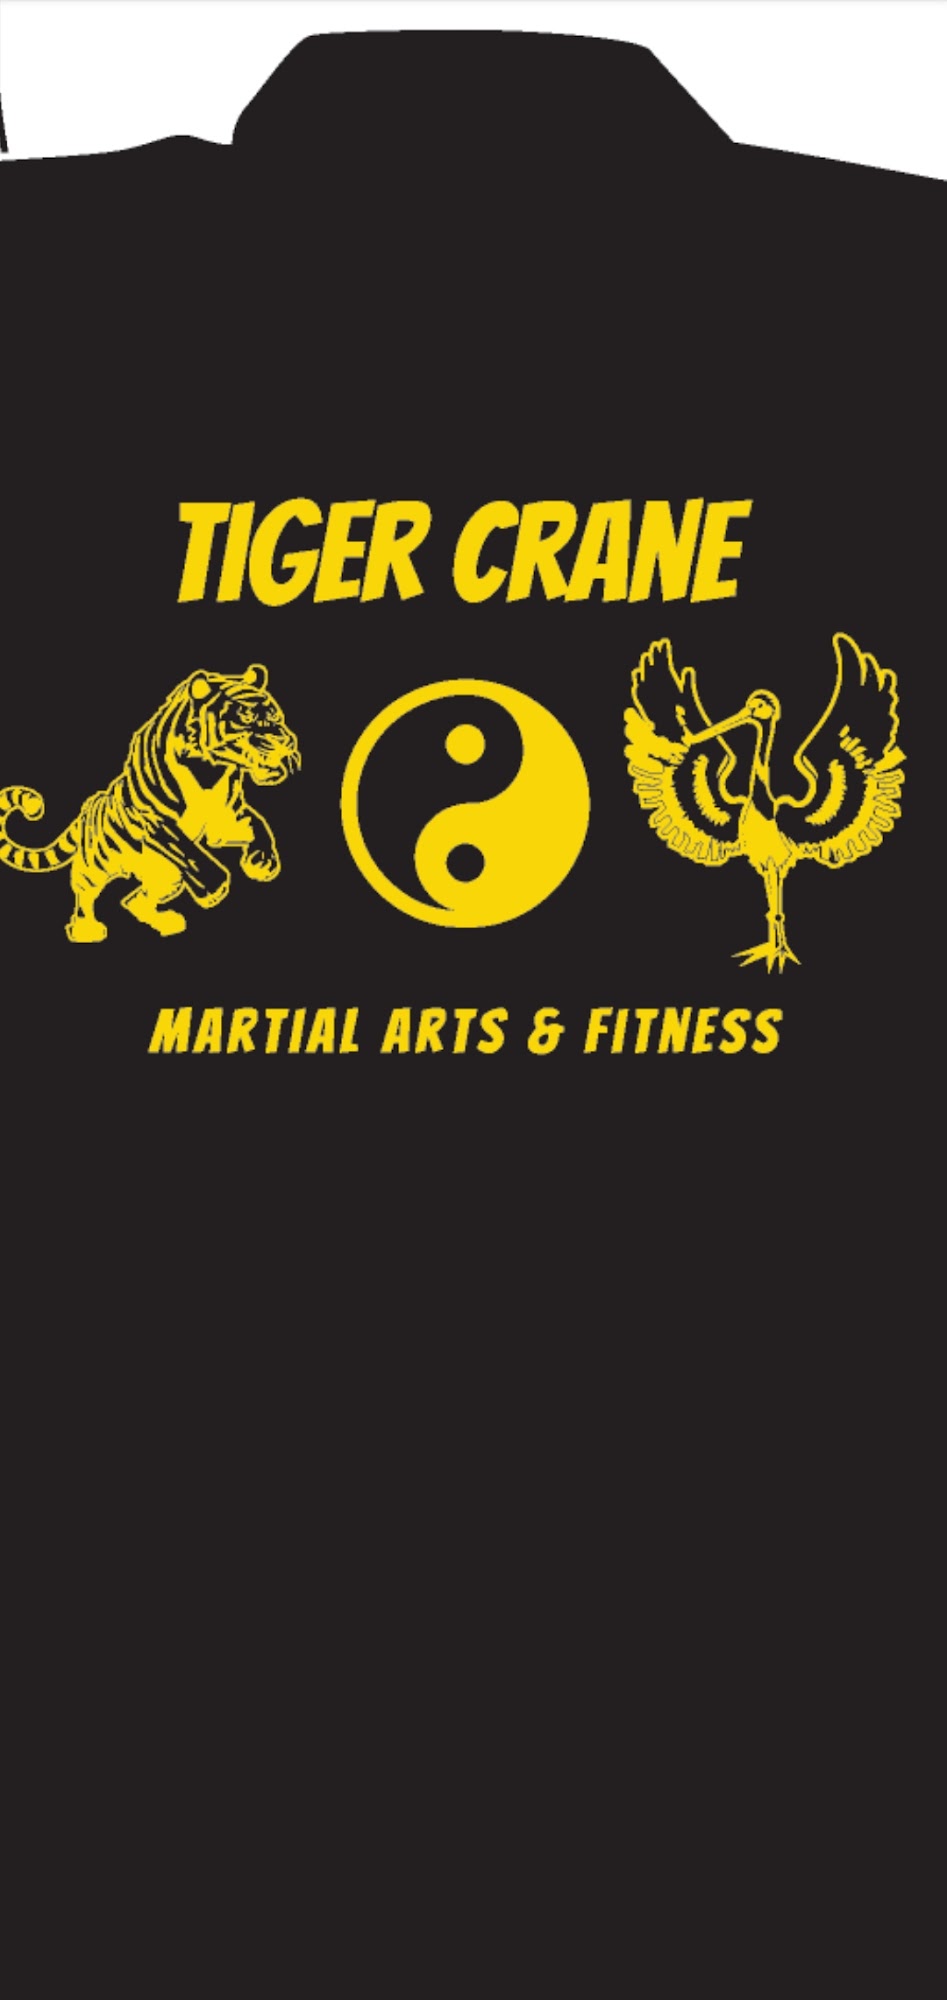 Tiger Crane Martial Arts and Fitness 18348 1/2 Soledad Canyon Rd, Canyon Country California 91387